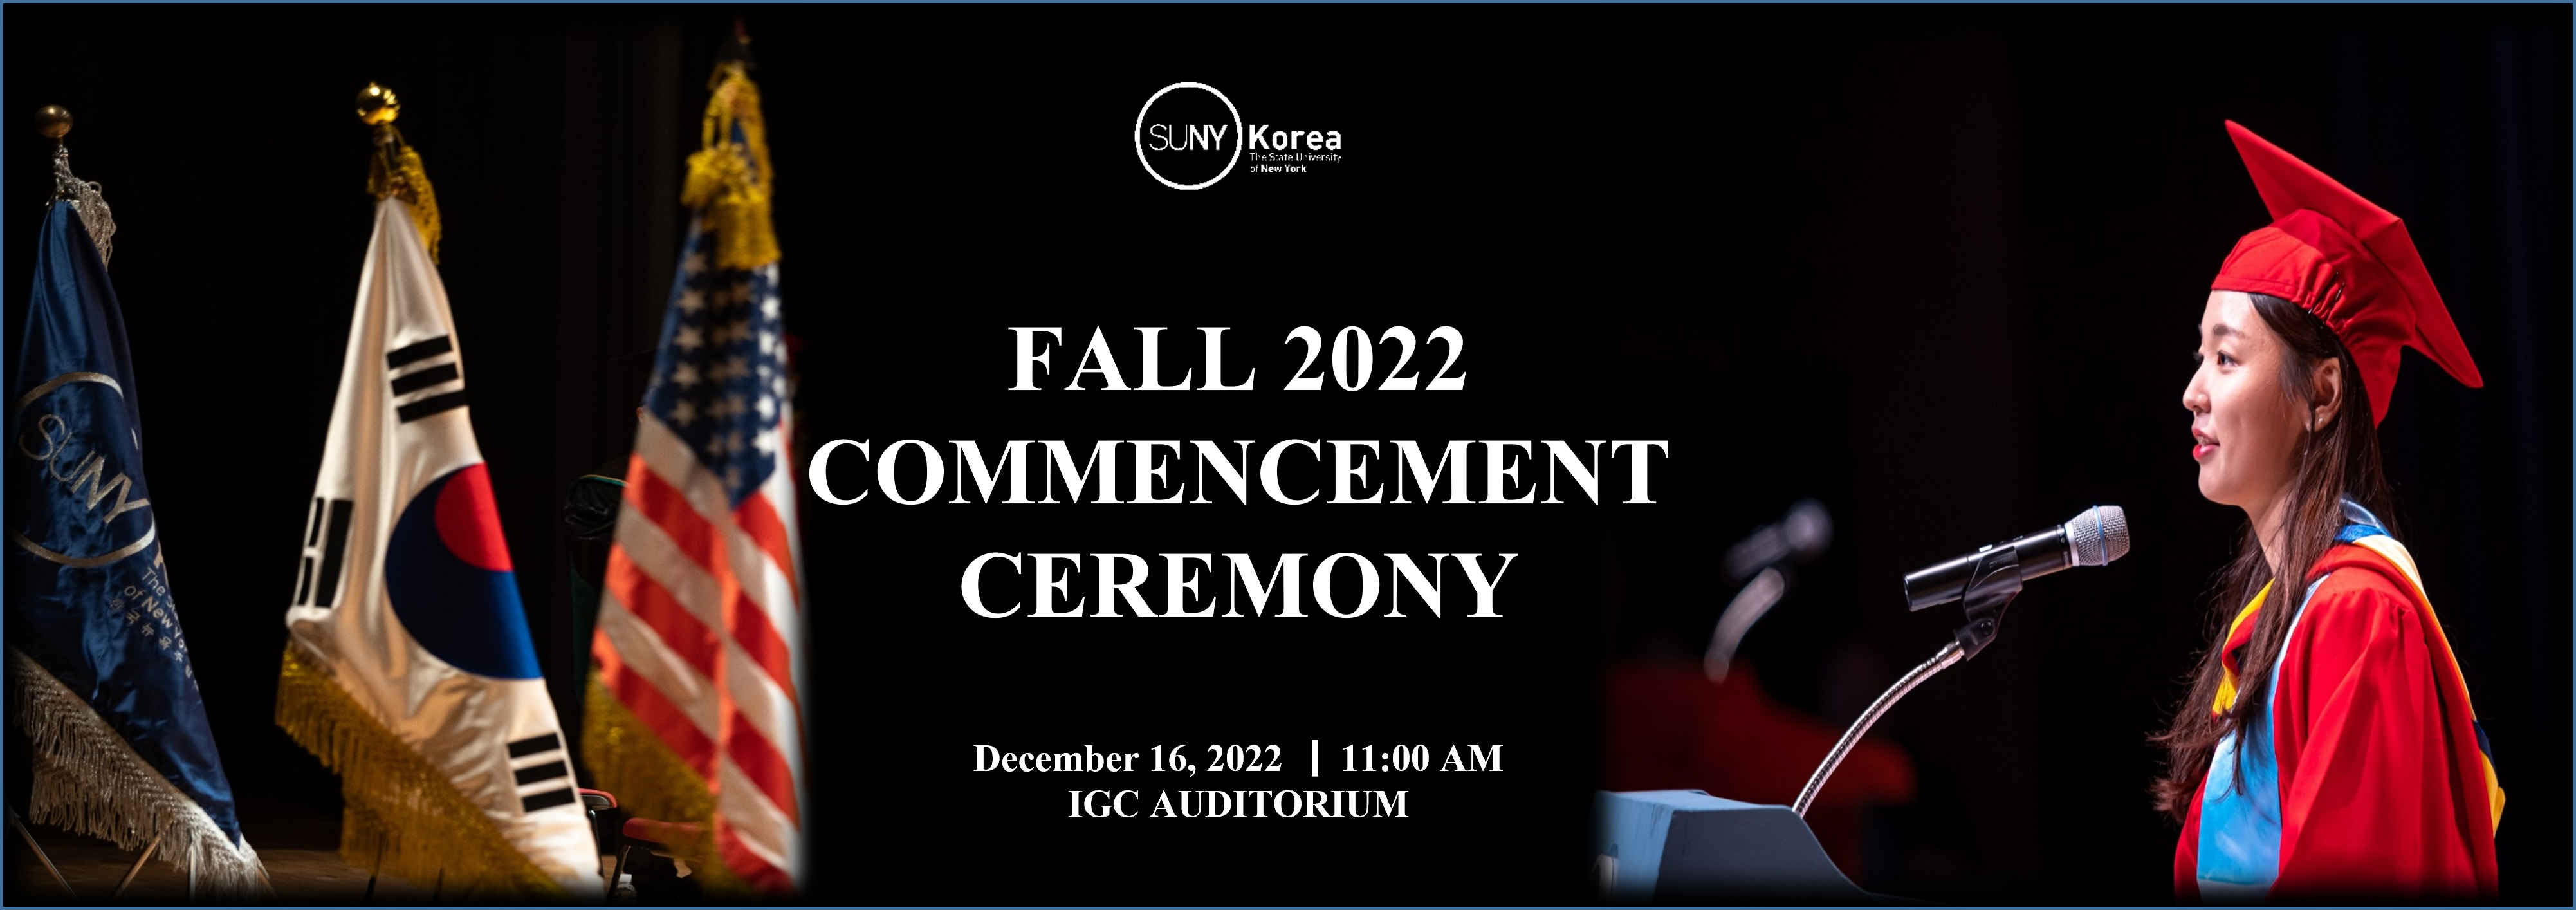 Fall 2022 Commencement Ceremony image